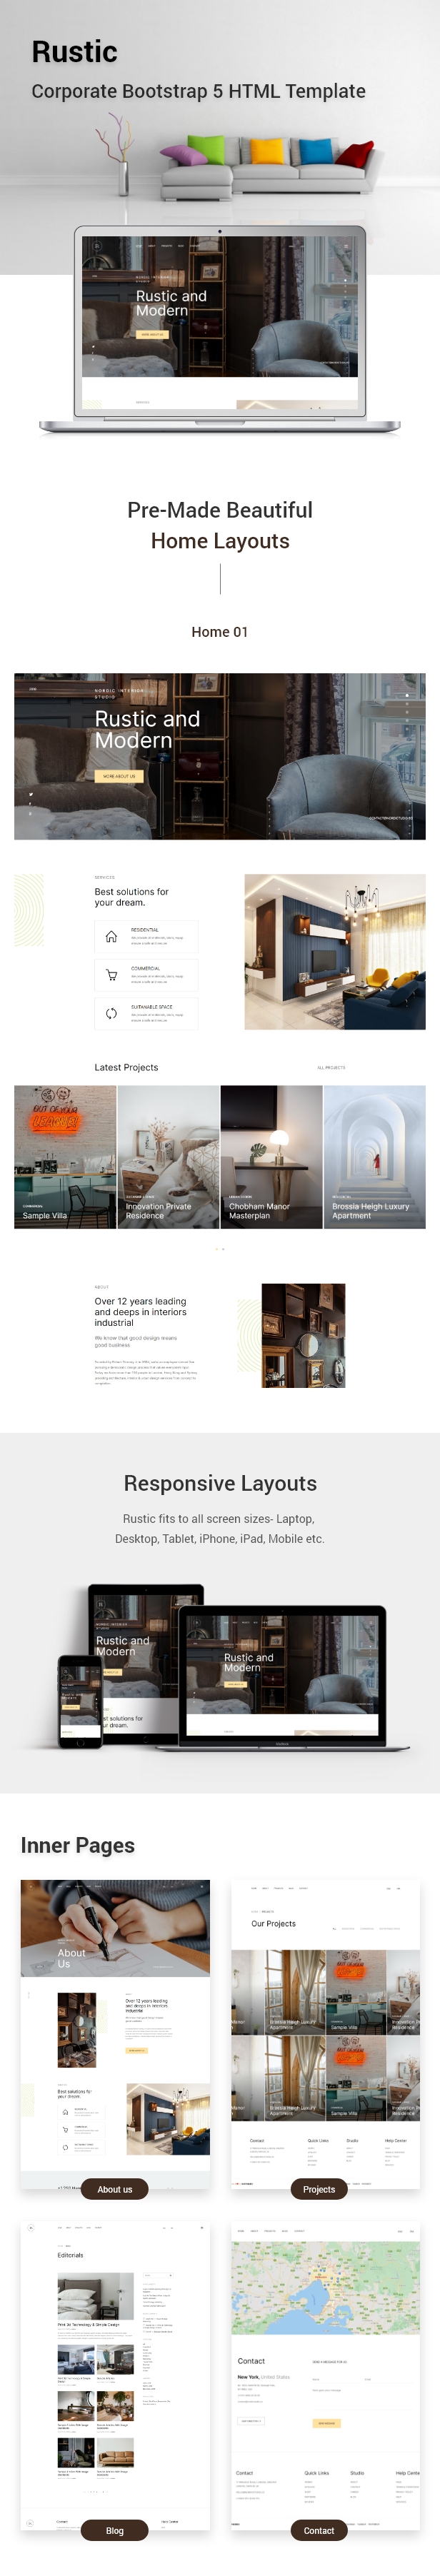 Rustic - Corporate Bootstrap 5 HTML Template - 1